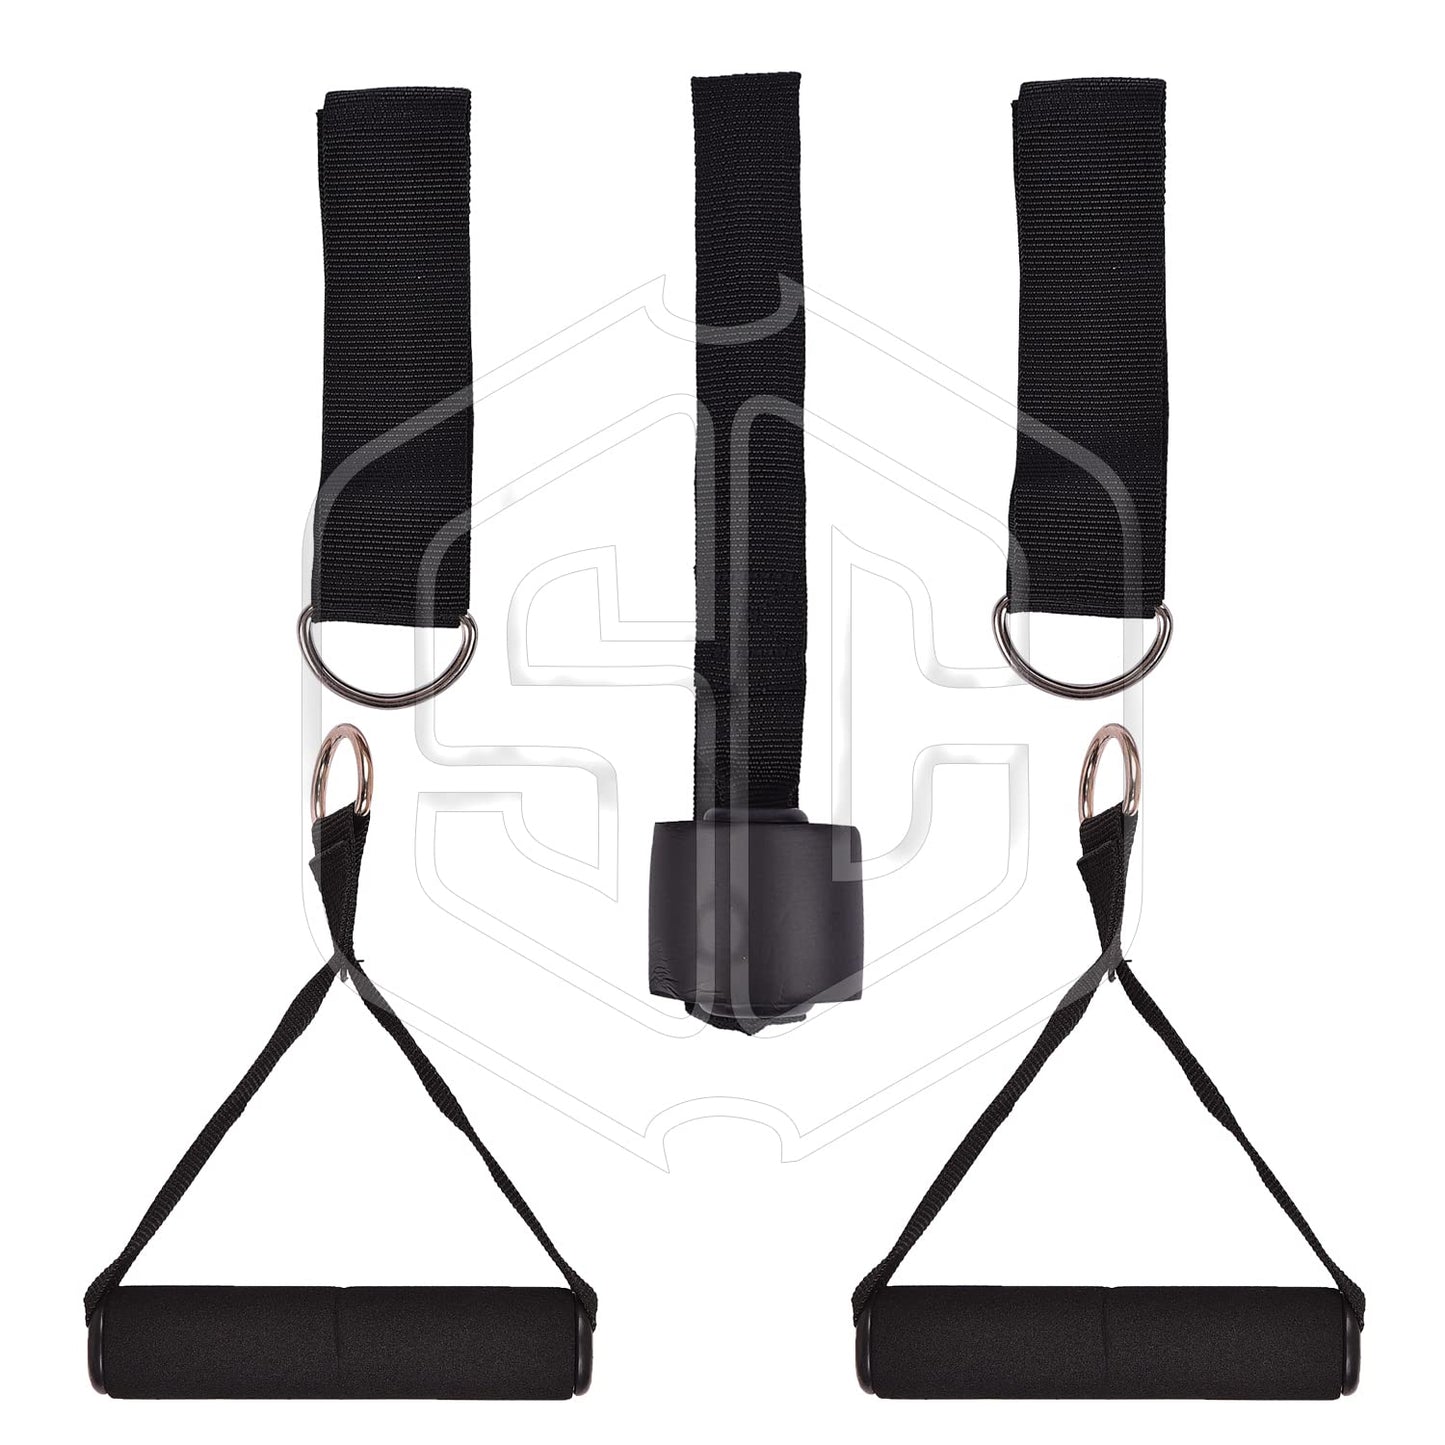 Resistance Bands Set For Exercise, Resistance Band Set, Stretching, And Workout Toning Tube Kit With Foam Handles